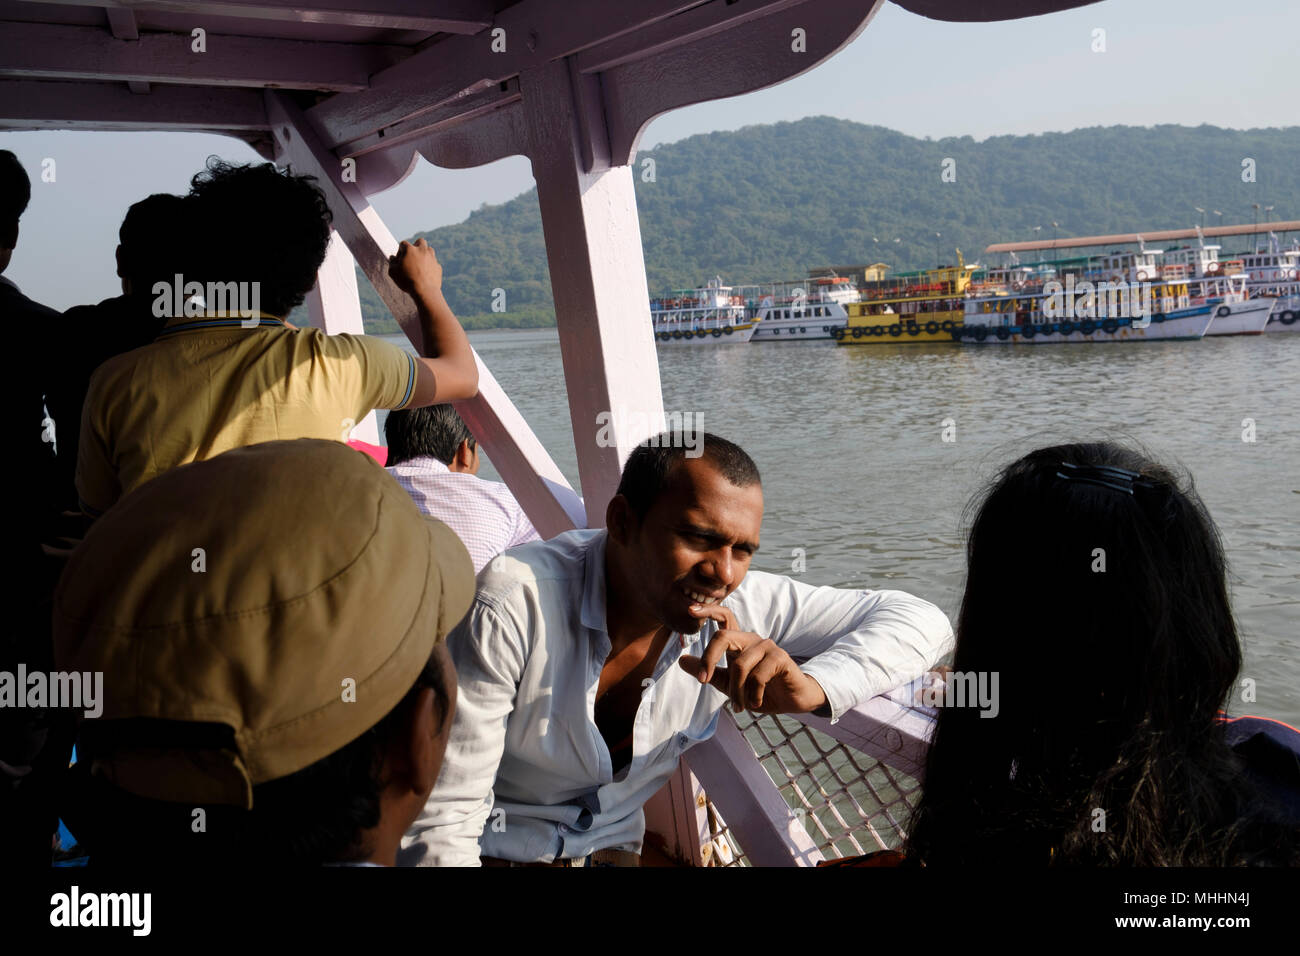 India - Mumbai - Tourists on the ferry to the Elephanta Caves on Elephanta Island. The Unesco World Heritage Site lies in the Mumbai Harbour about 7km from the mainland shore at Mumbai. Stock Photo